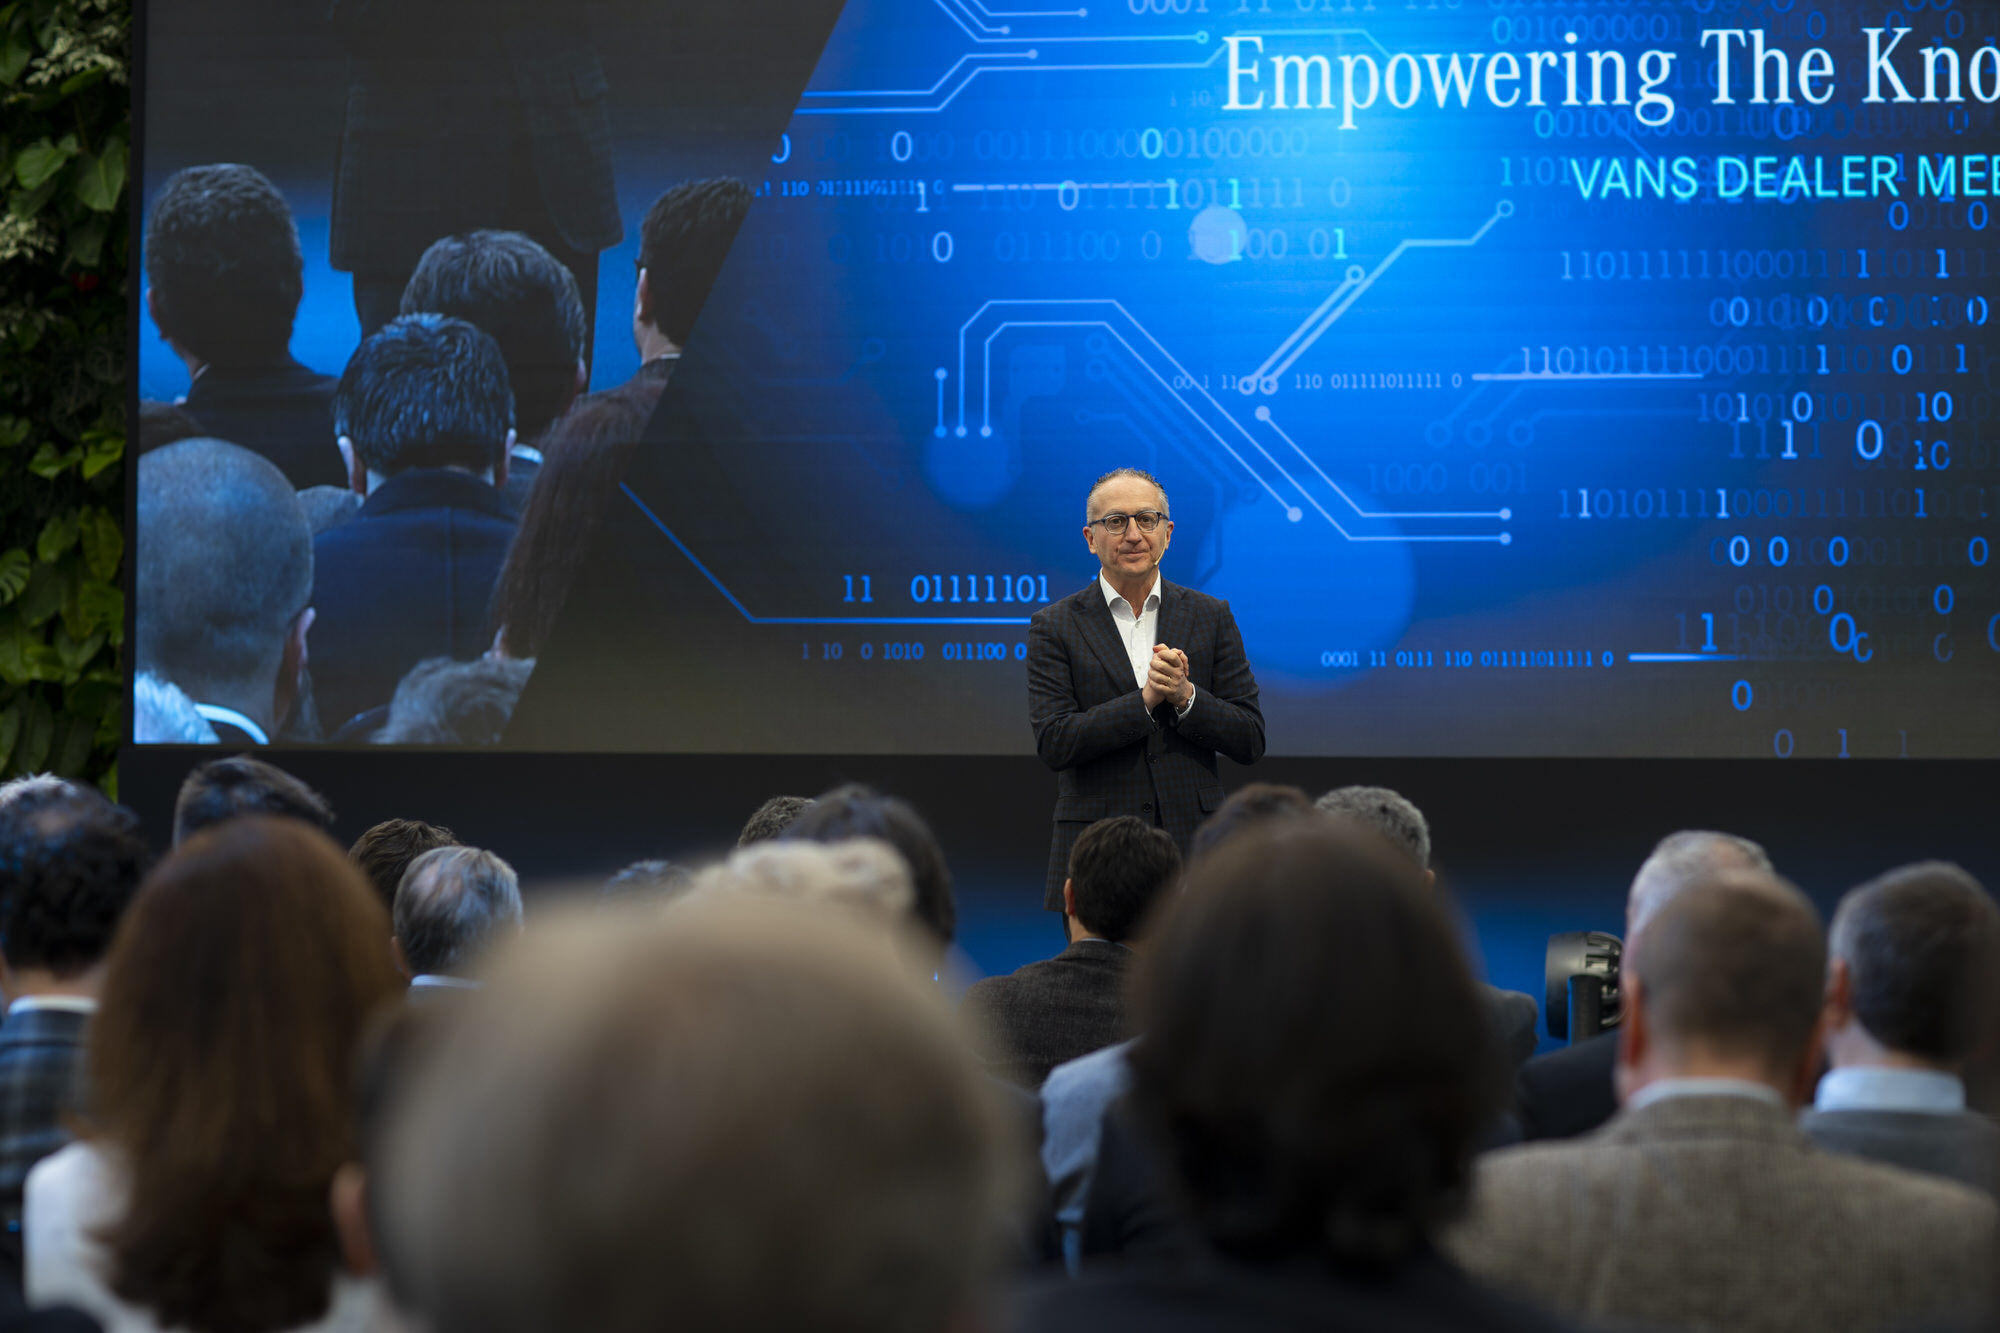 empowering-the-knowledge-vans-dealer-meeting-2019-gruppo-peroni-eventi-02